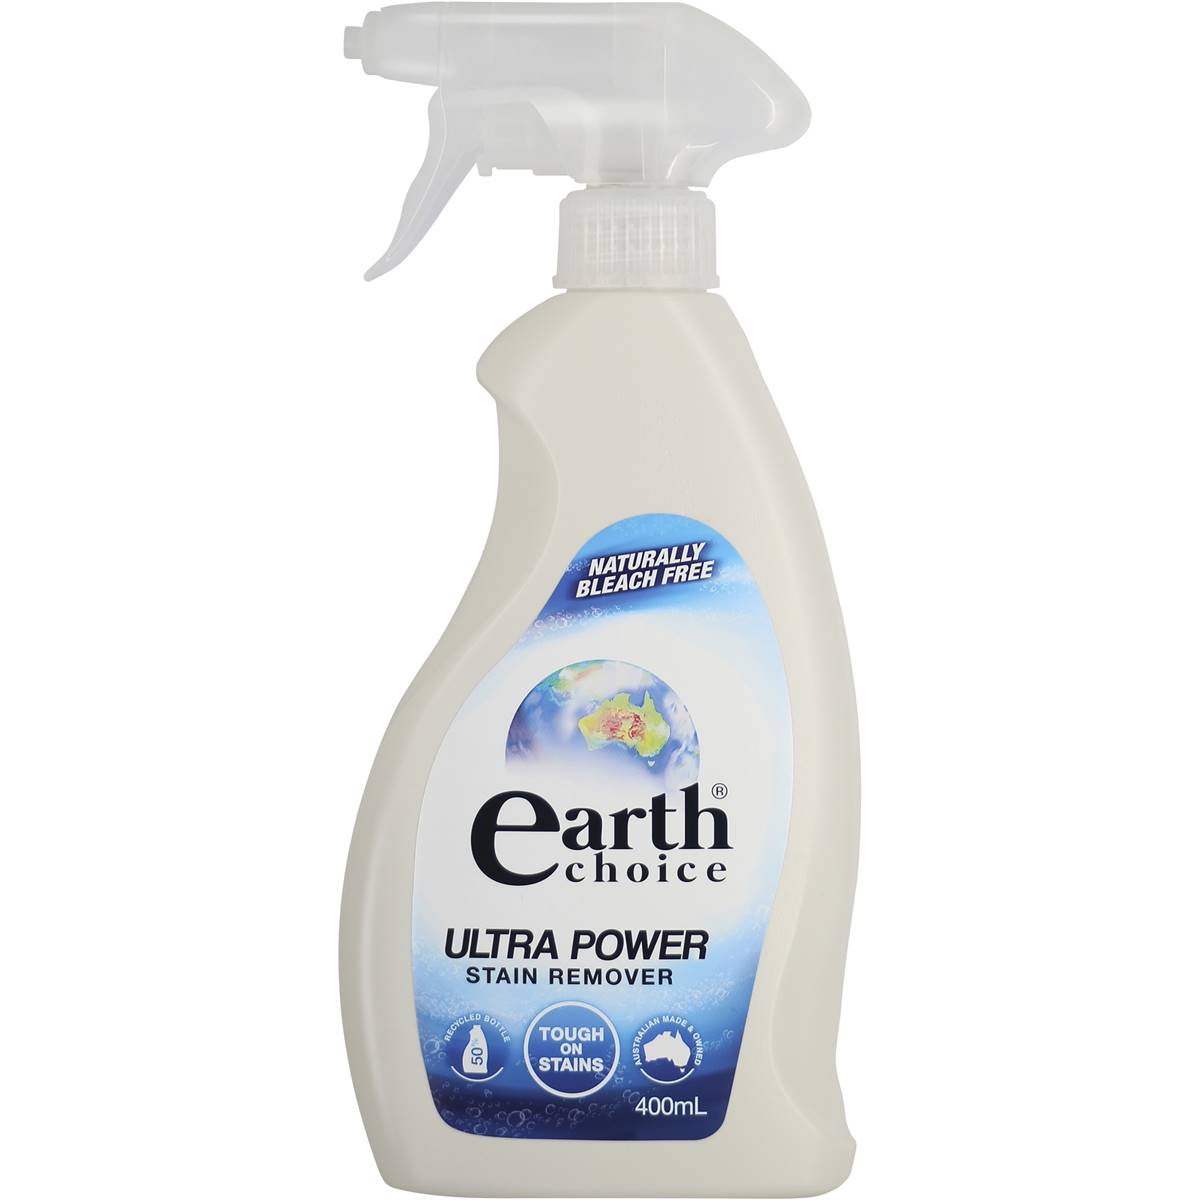 Earth Choice Pre Wash Stain Remover 400ml